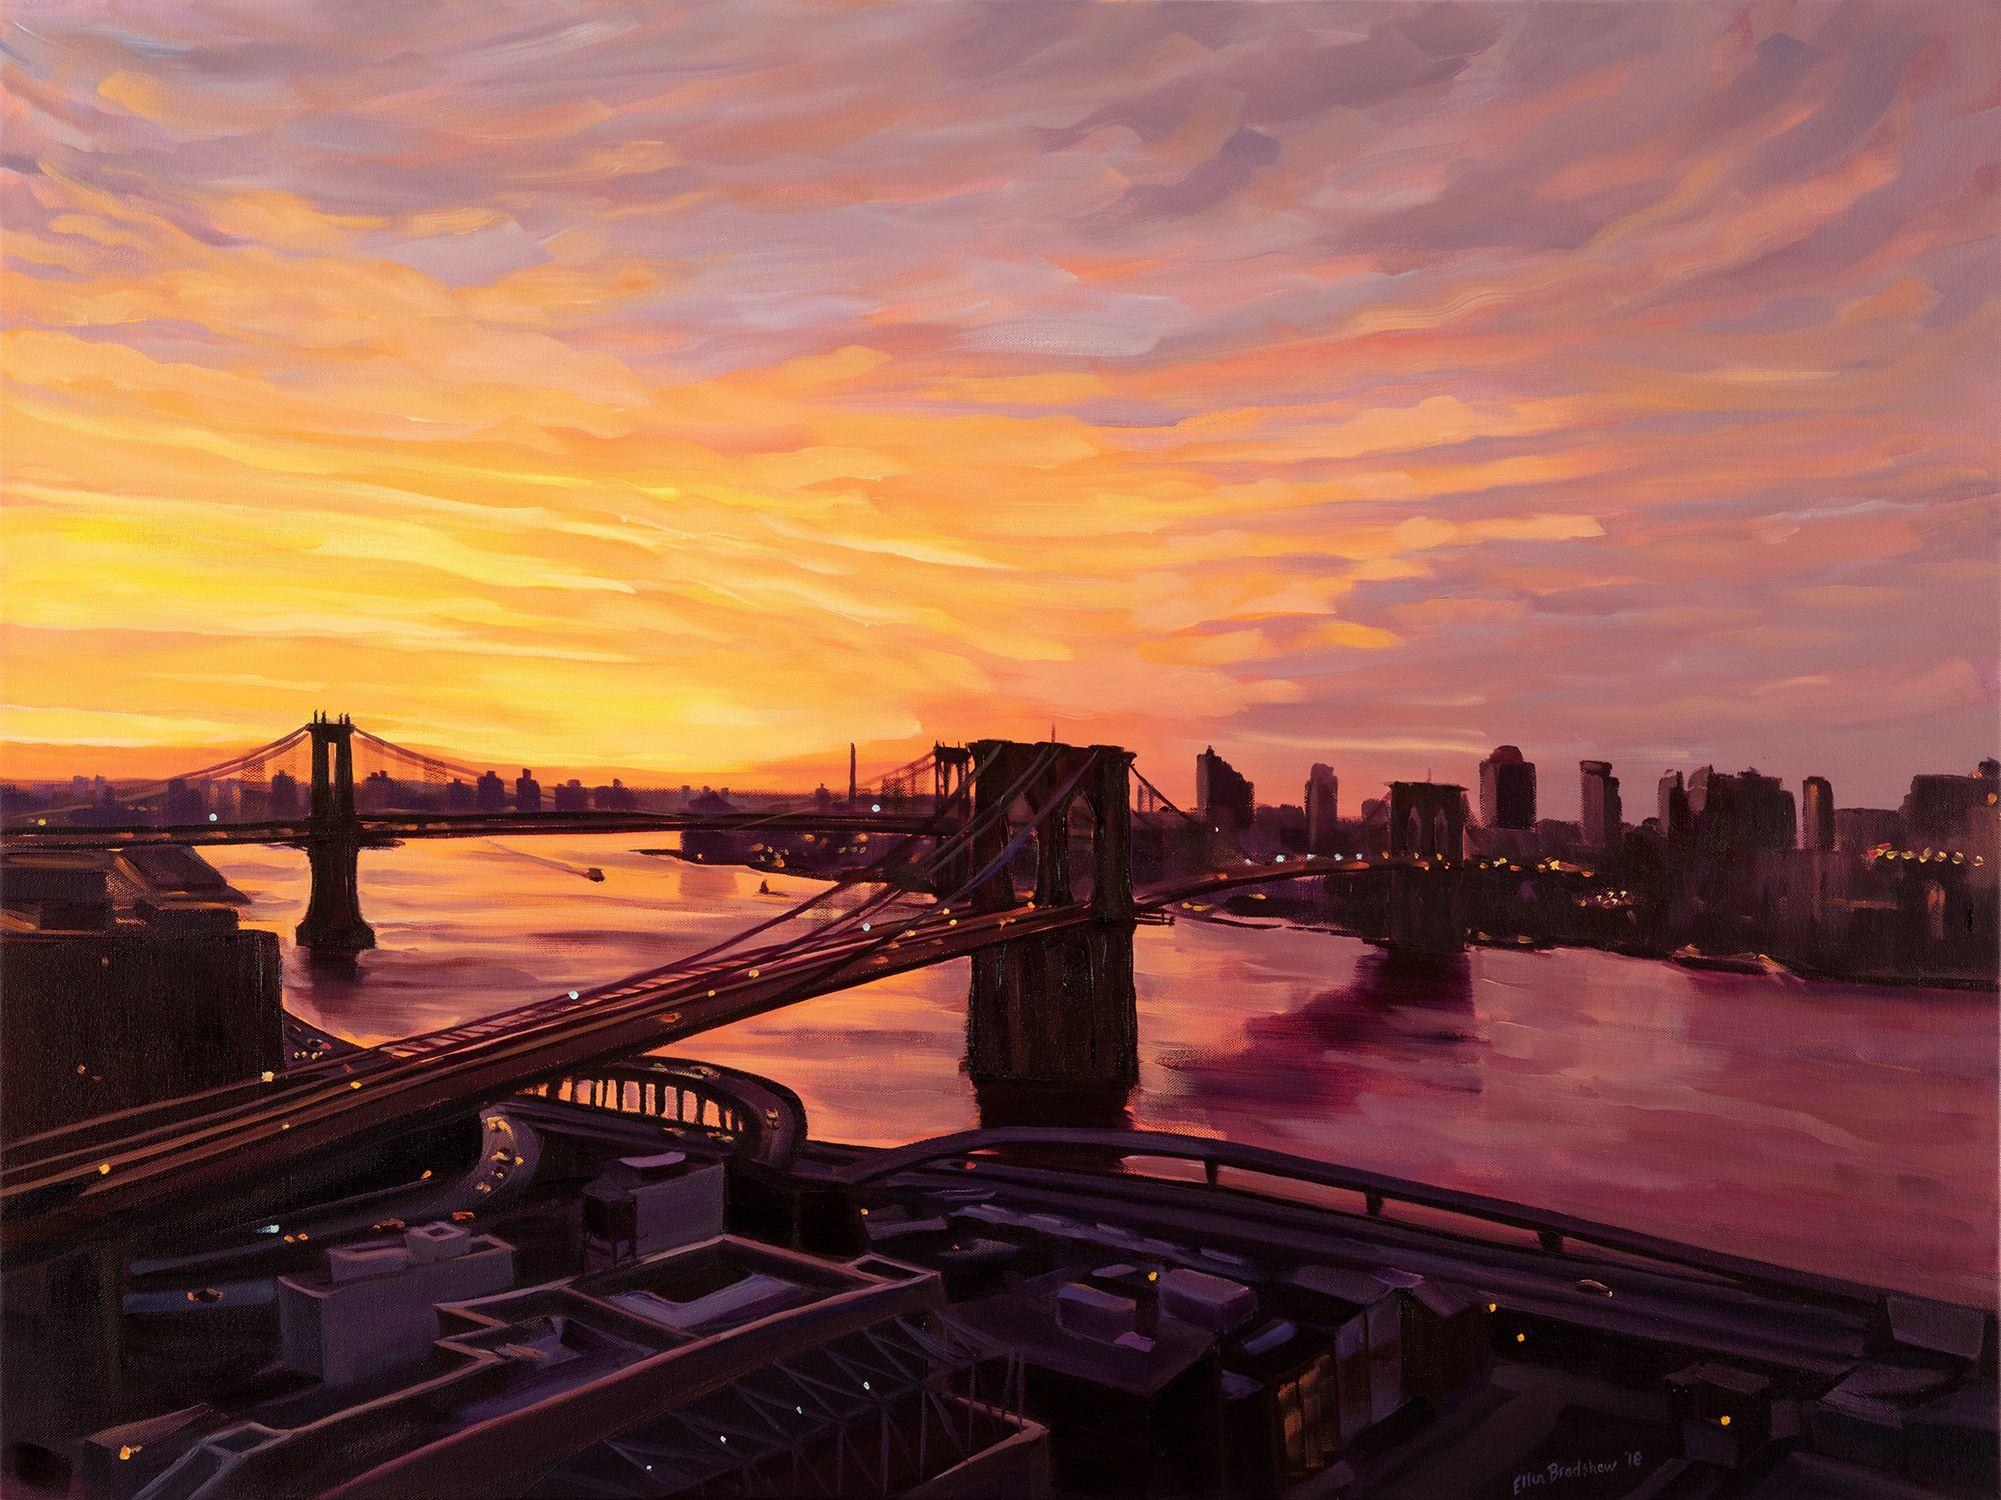 A stunning sunrise view from the artist's balcony on the 25th floor of her apartment inspired this colorful vision! Intense orange, yellows, and violets sing and swirl above the Brooklyn and Manhattan Bridges over the East River, lower Manhattan and